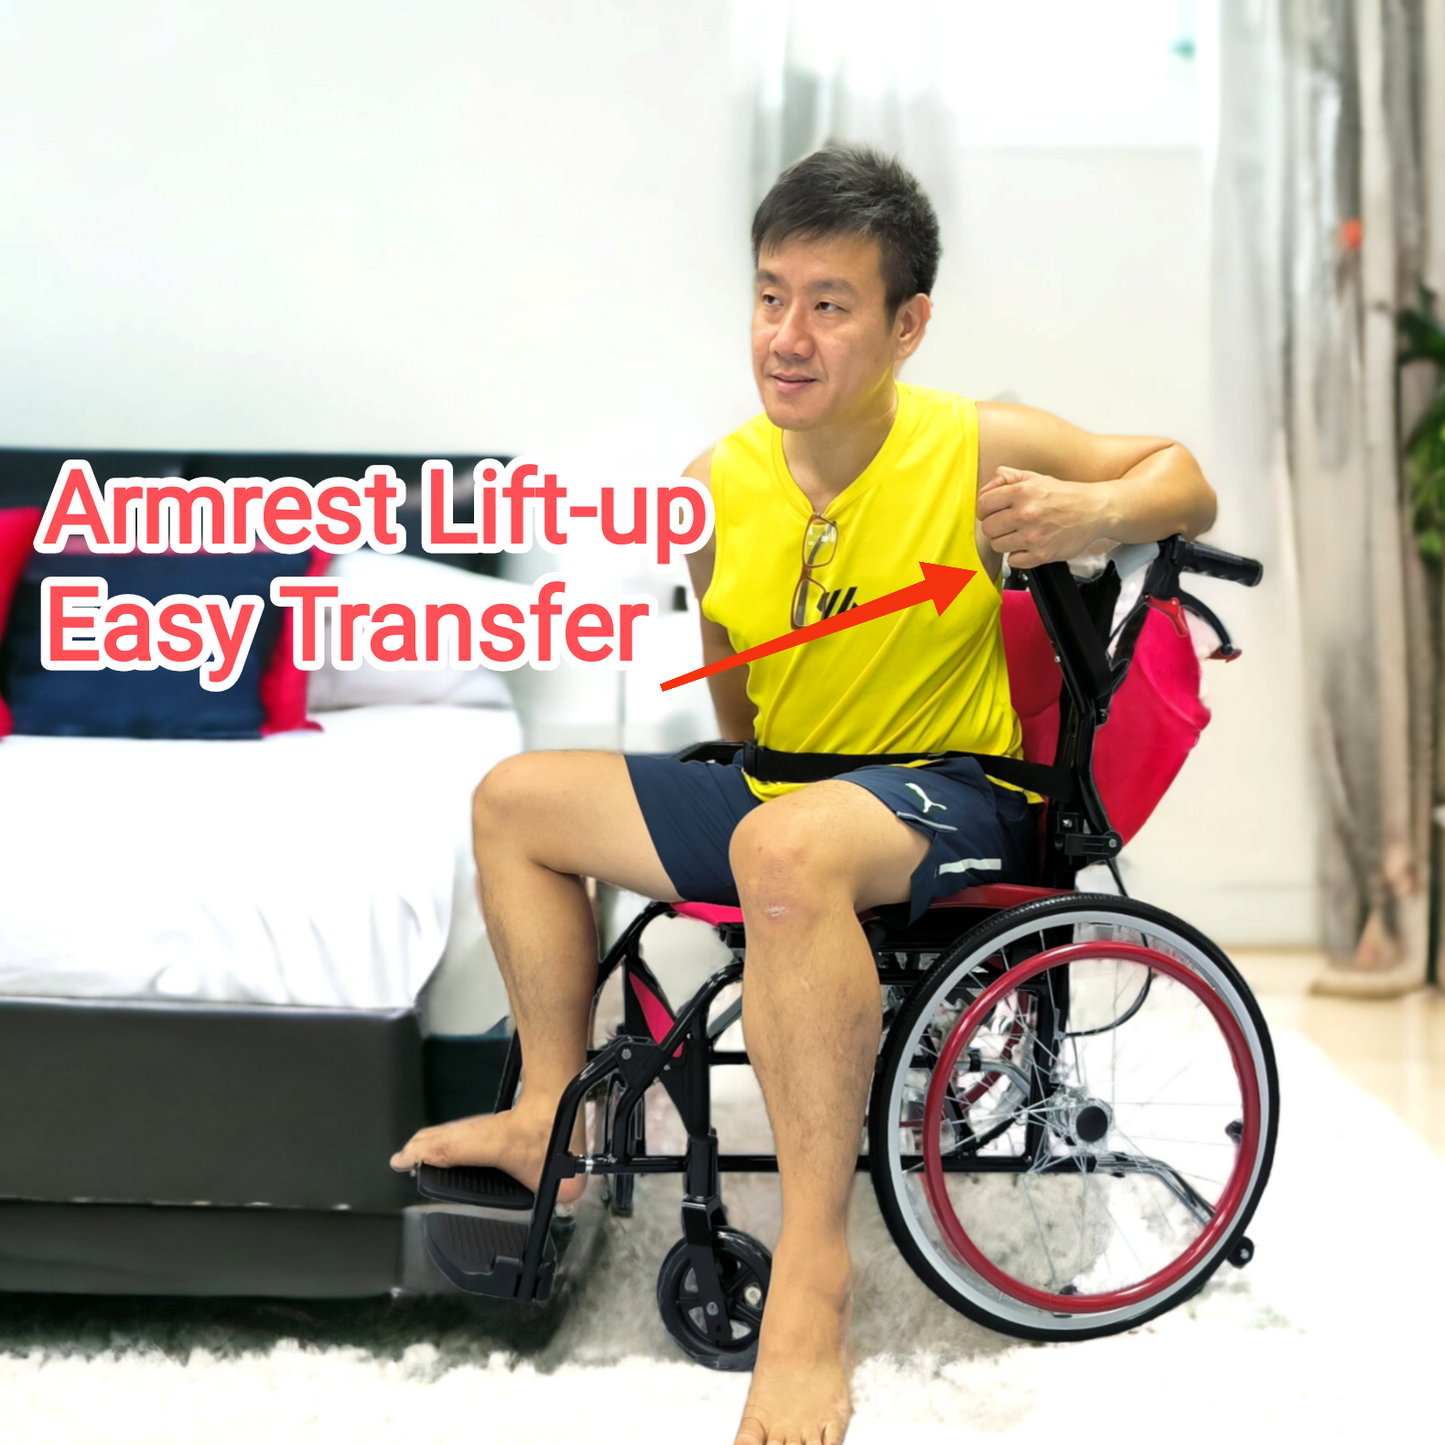 1.41 - "Model DY879" Wheelchair - Retractable Footrest + Flip-up Armrest + Self Propelled